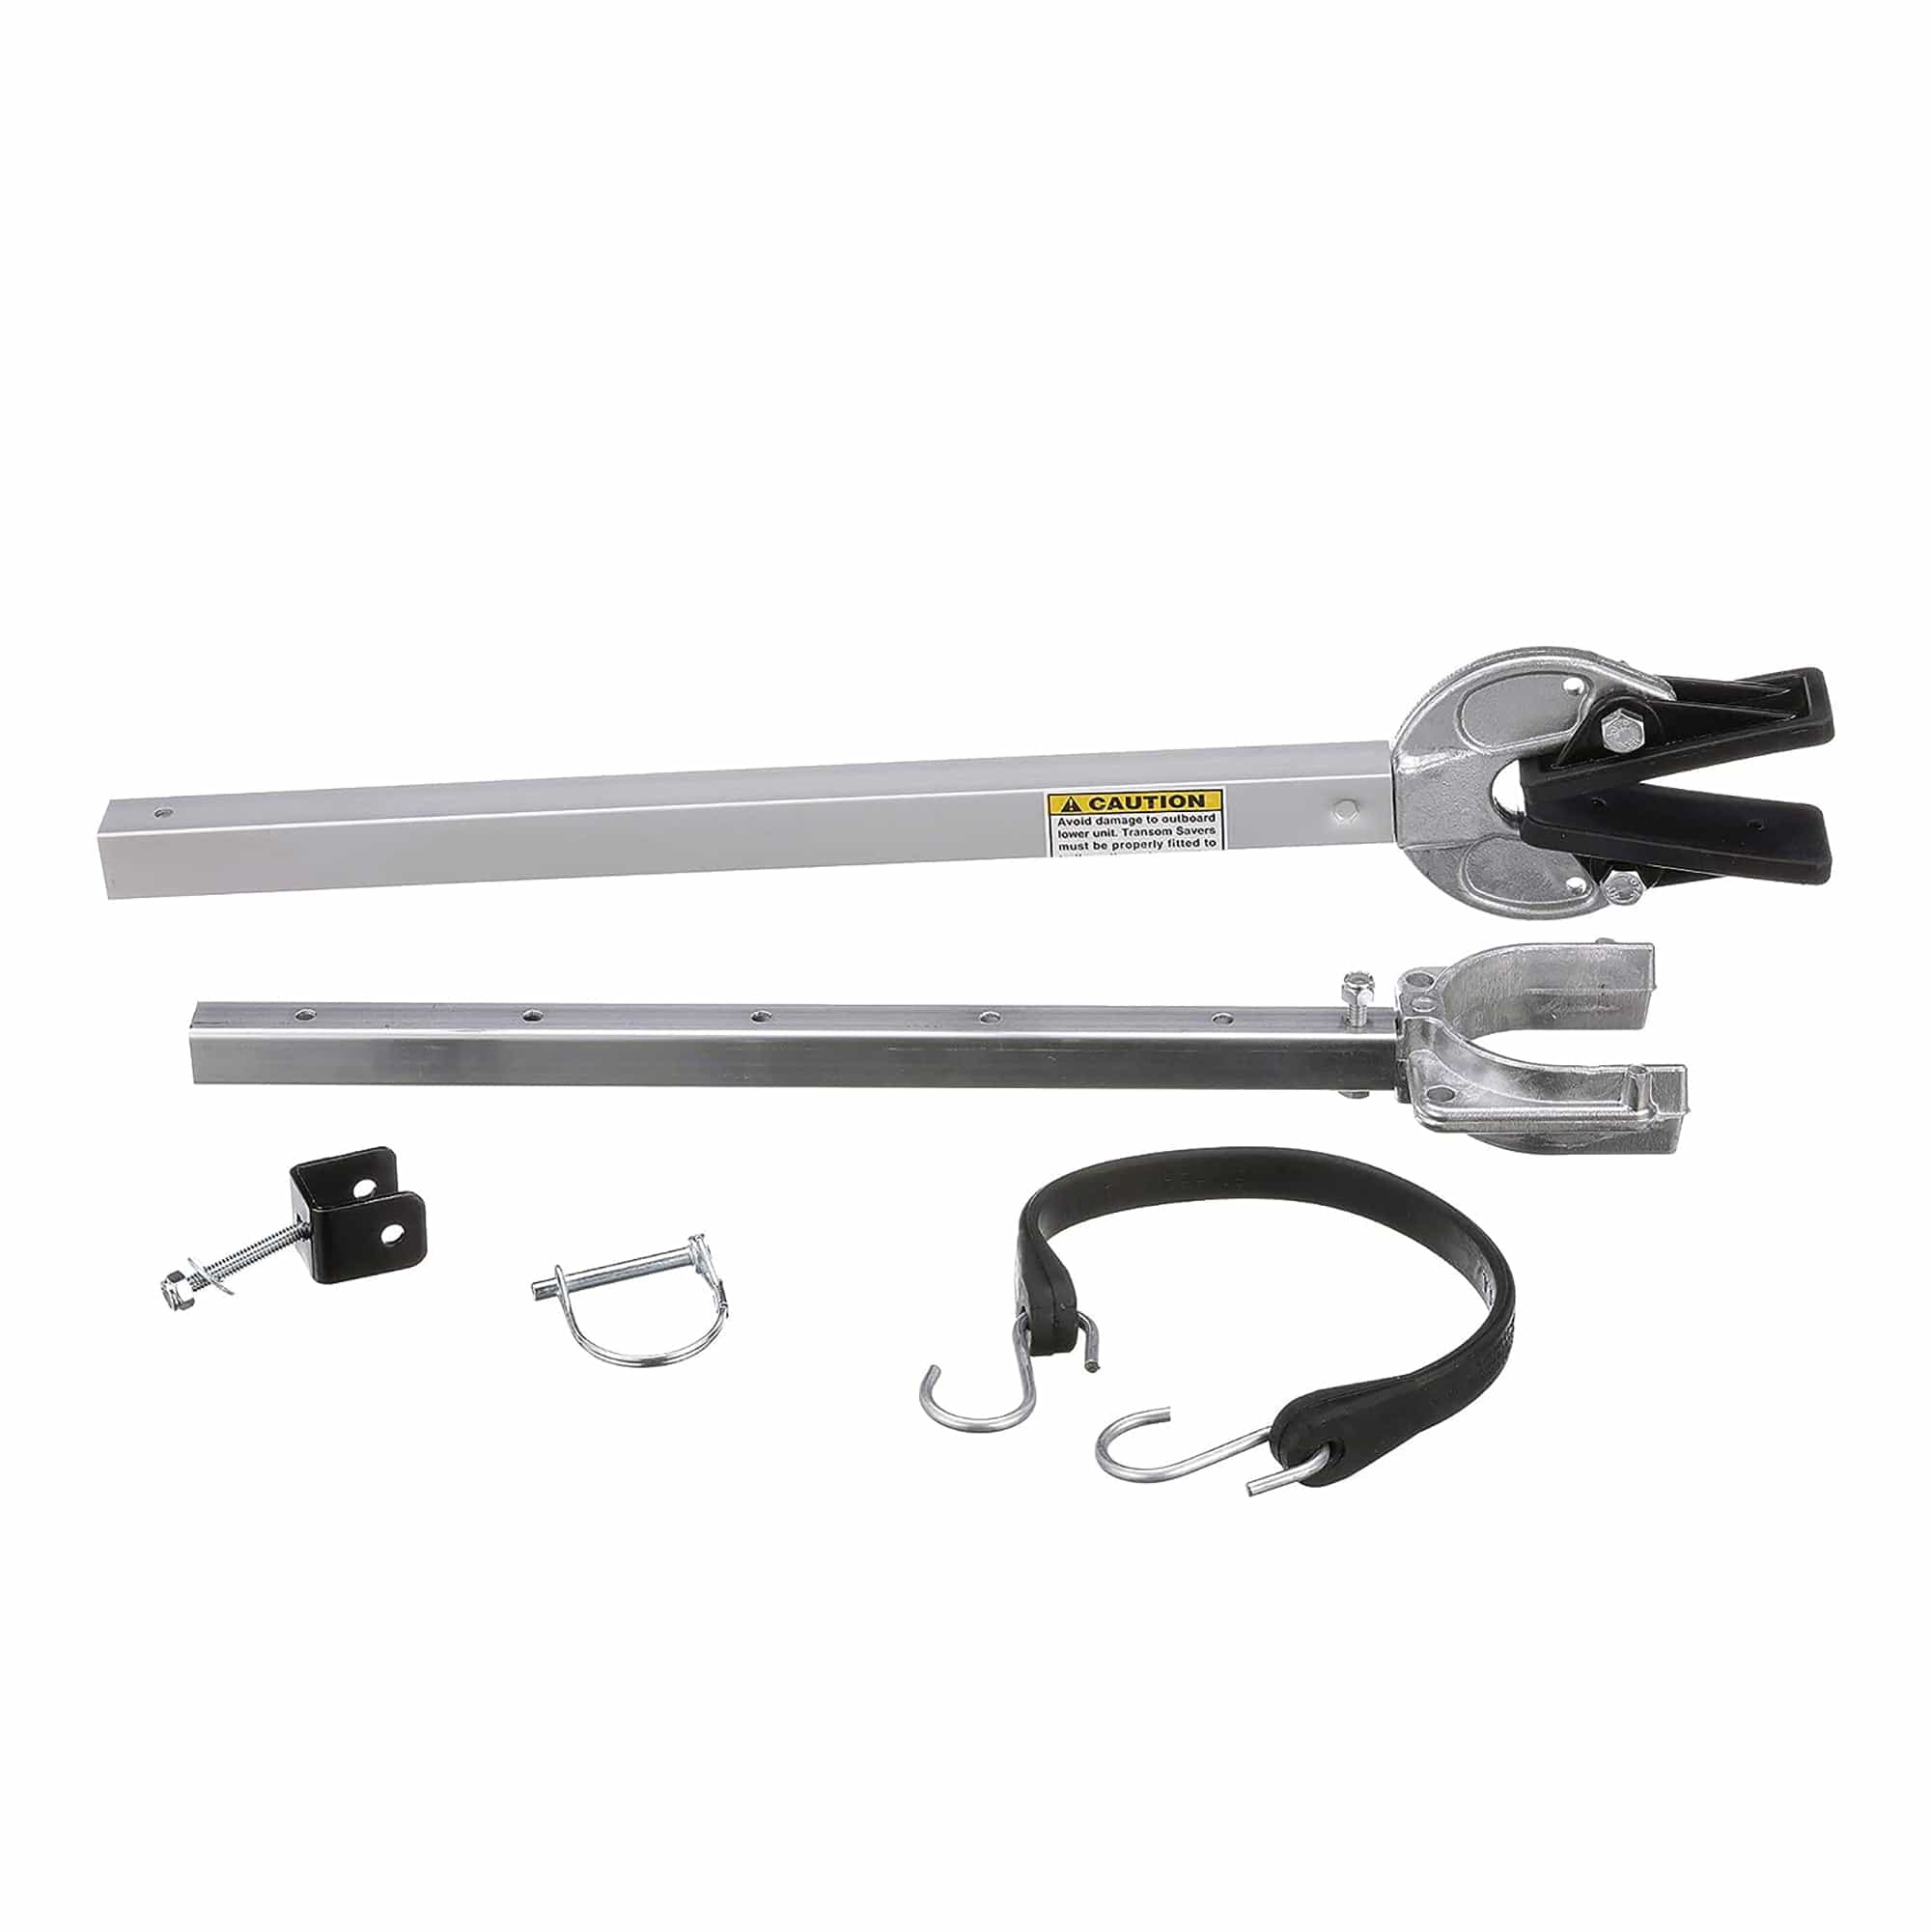 Adjustable Transom Saver, 23 to 35 Inches, Composite Head Holds Engine, Roller and Trailer Mounts - Attwood SP-400-RB